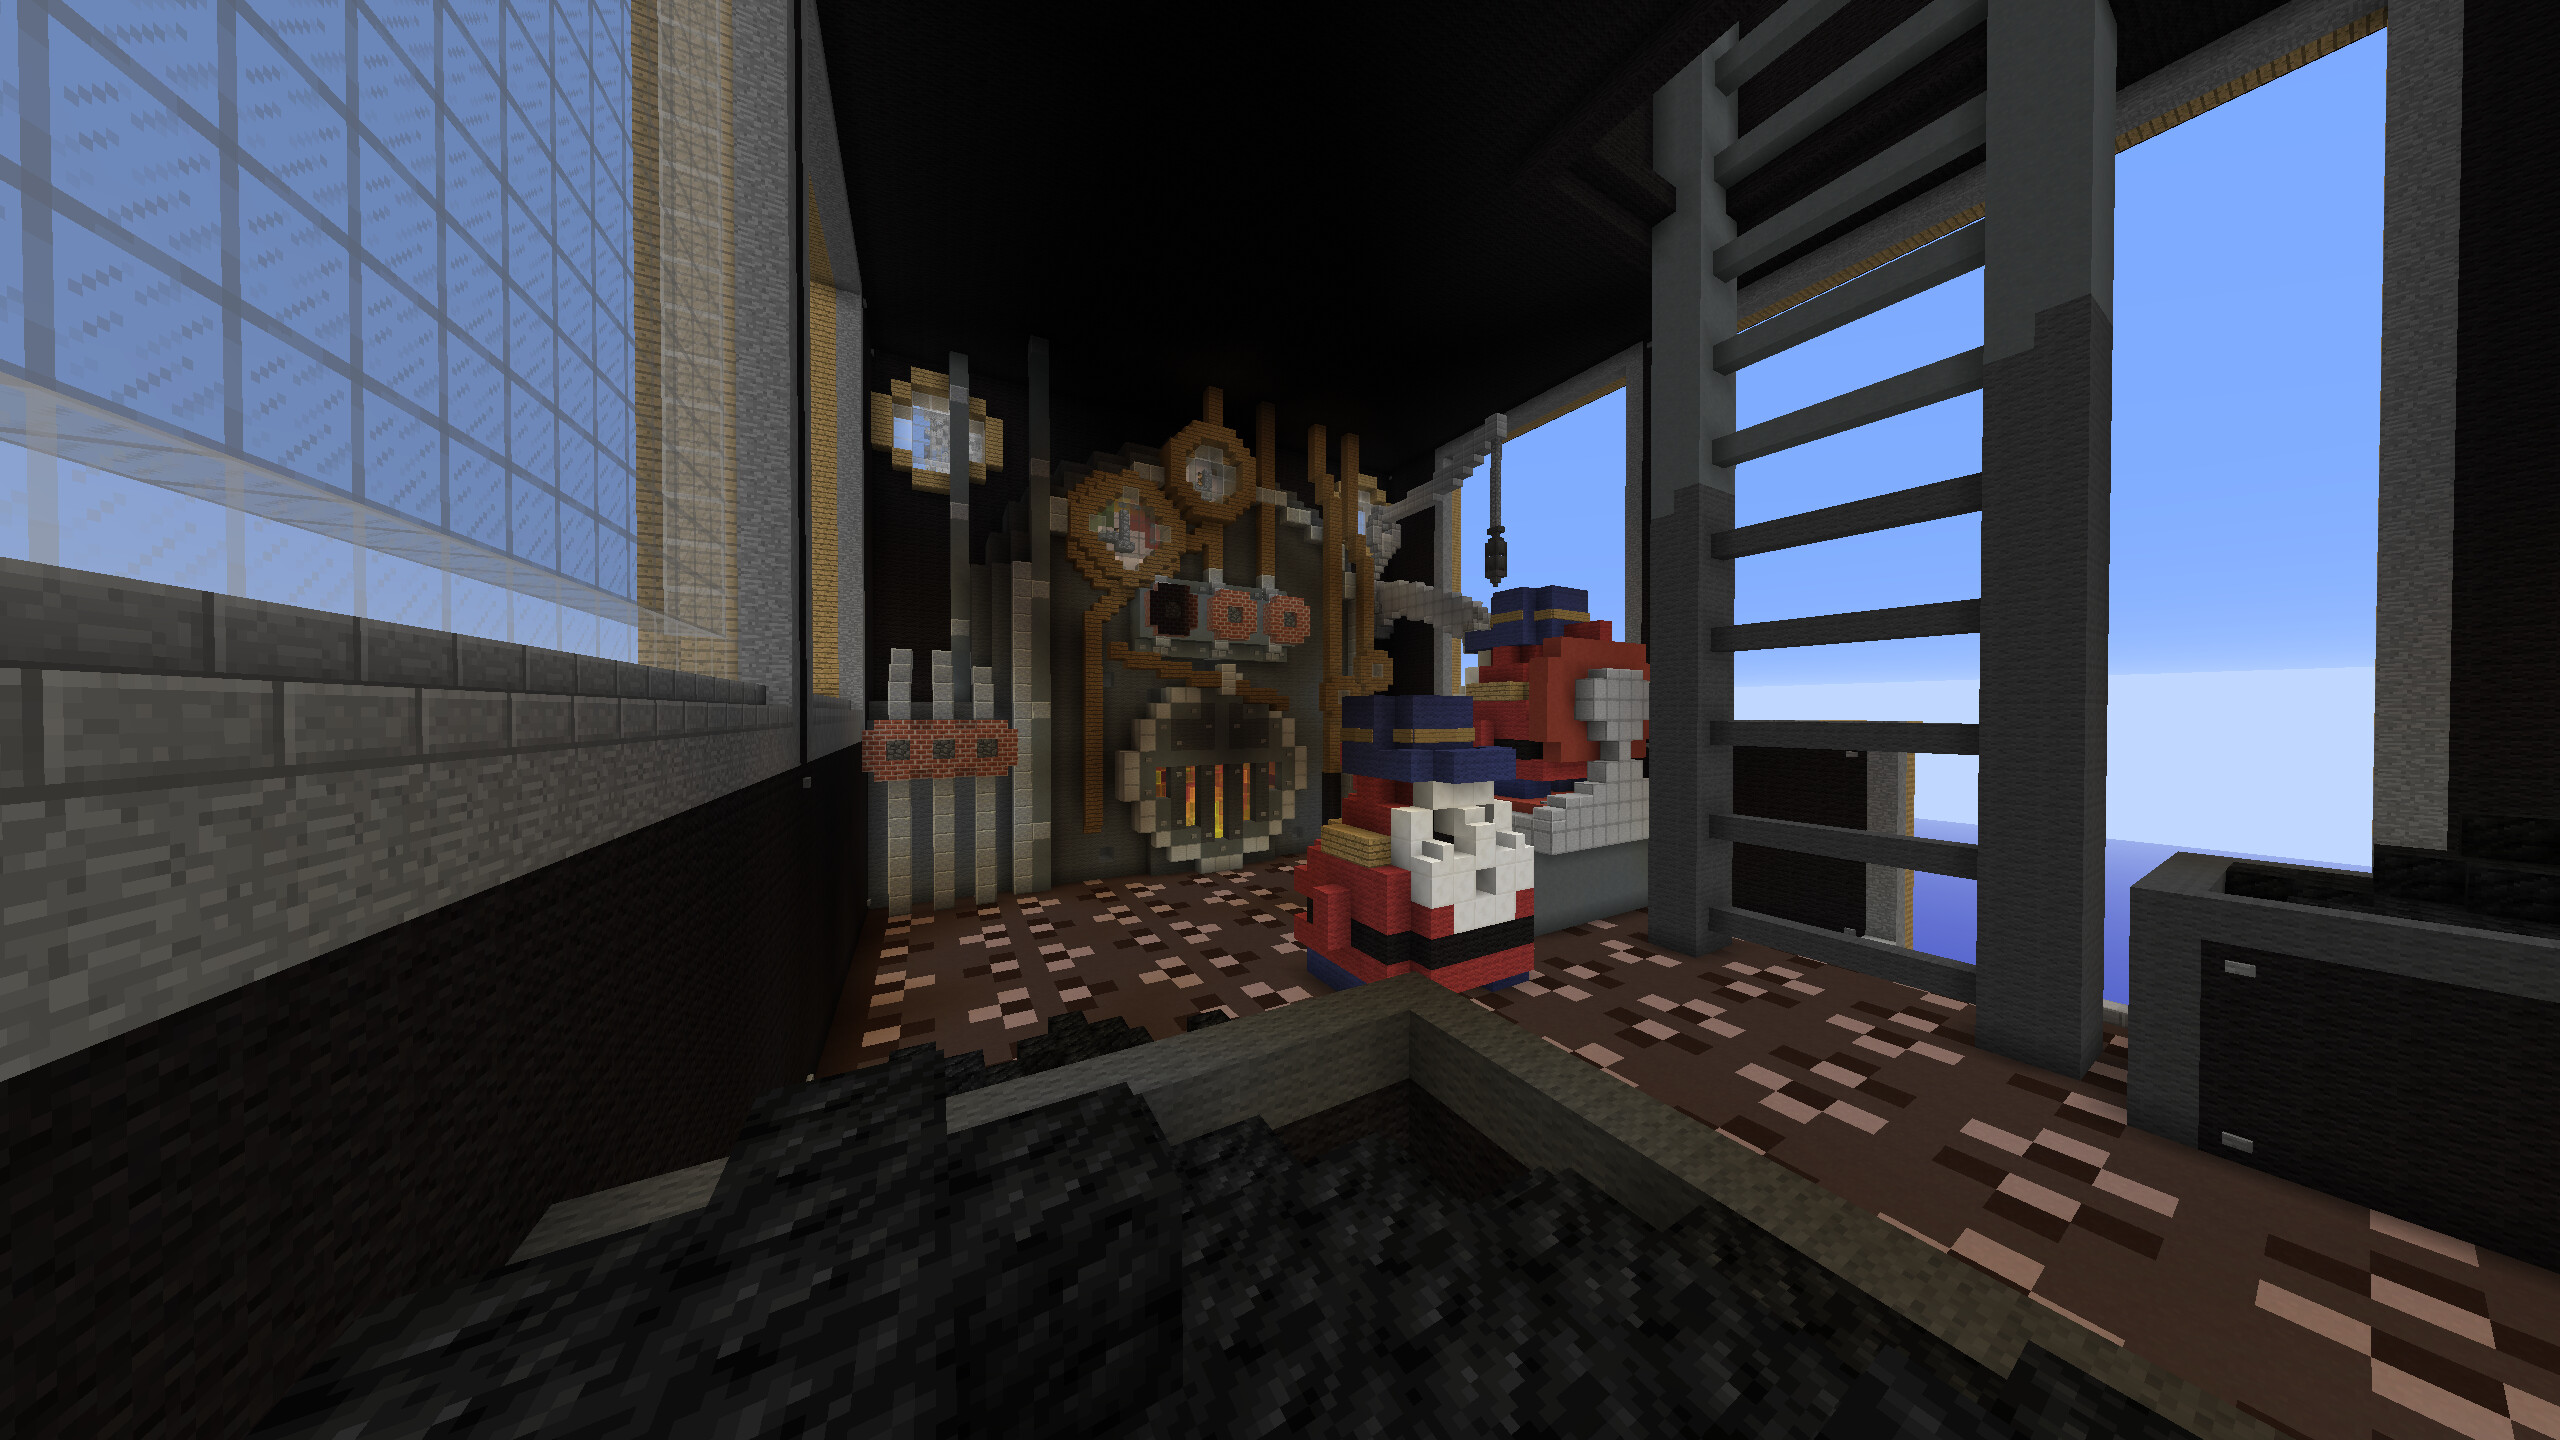 Exploring The Train From Mario Party 8 In Minecraft Is Pretty Fun